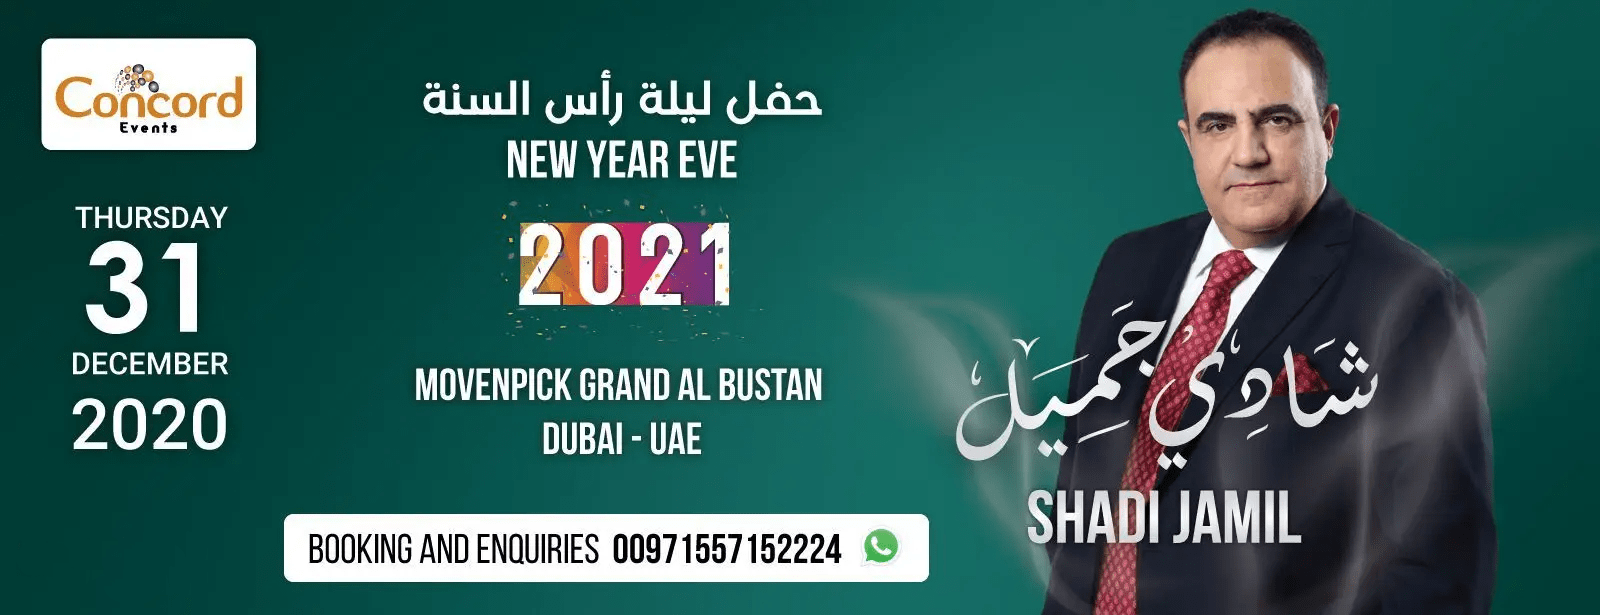 New Year Eve with Shadi Jamil - Coming Soon in UAE